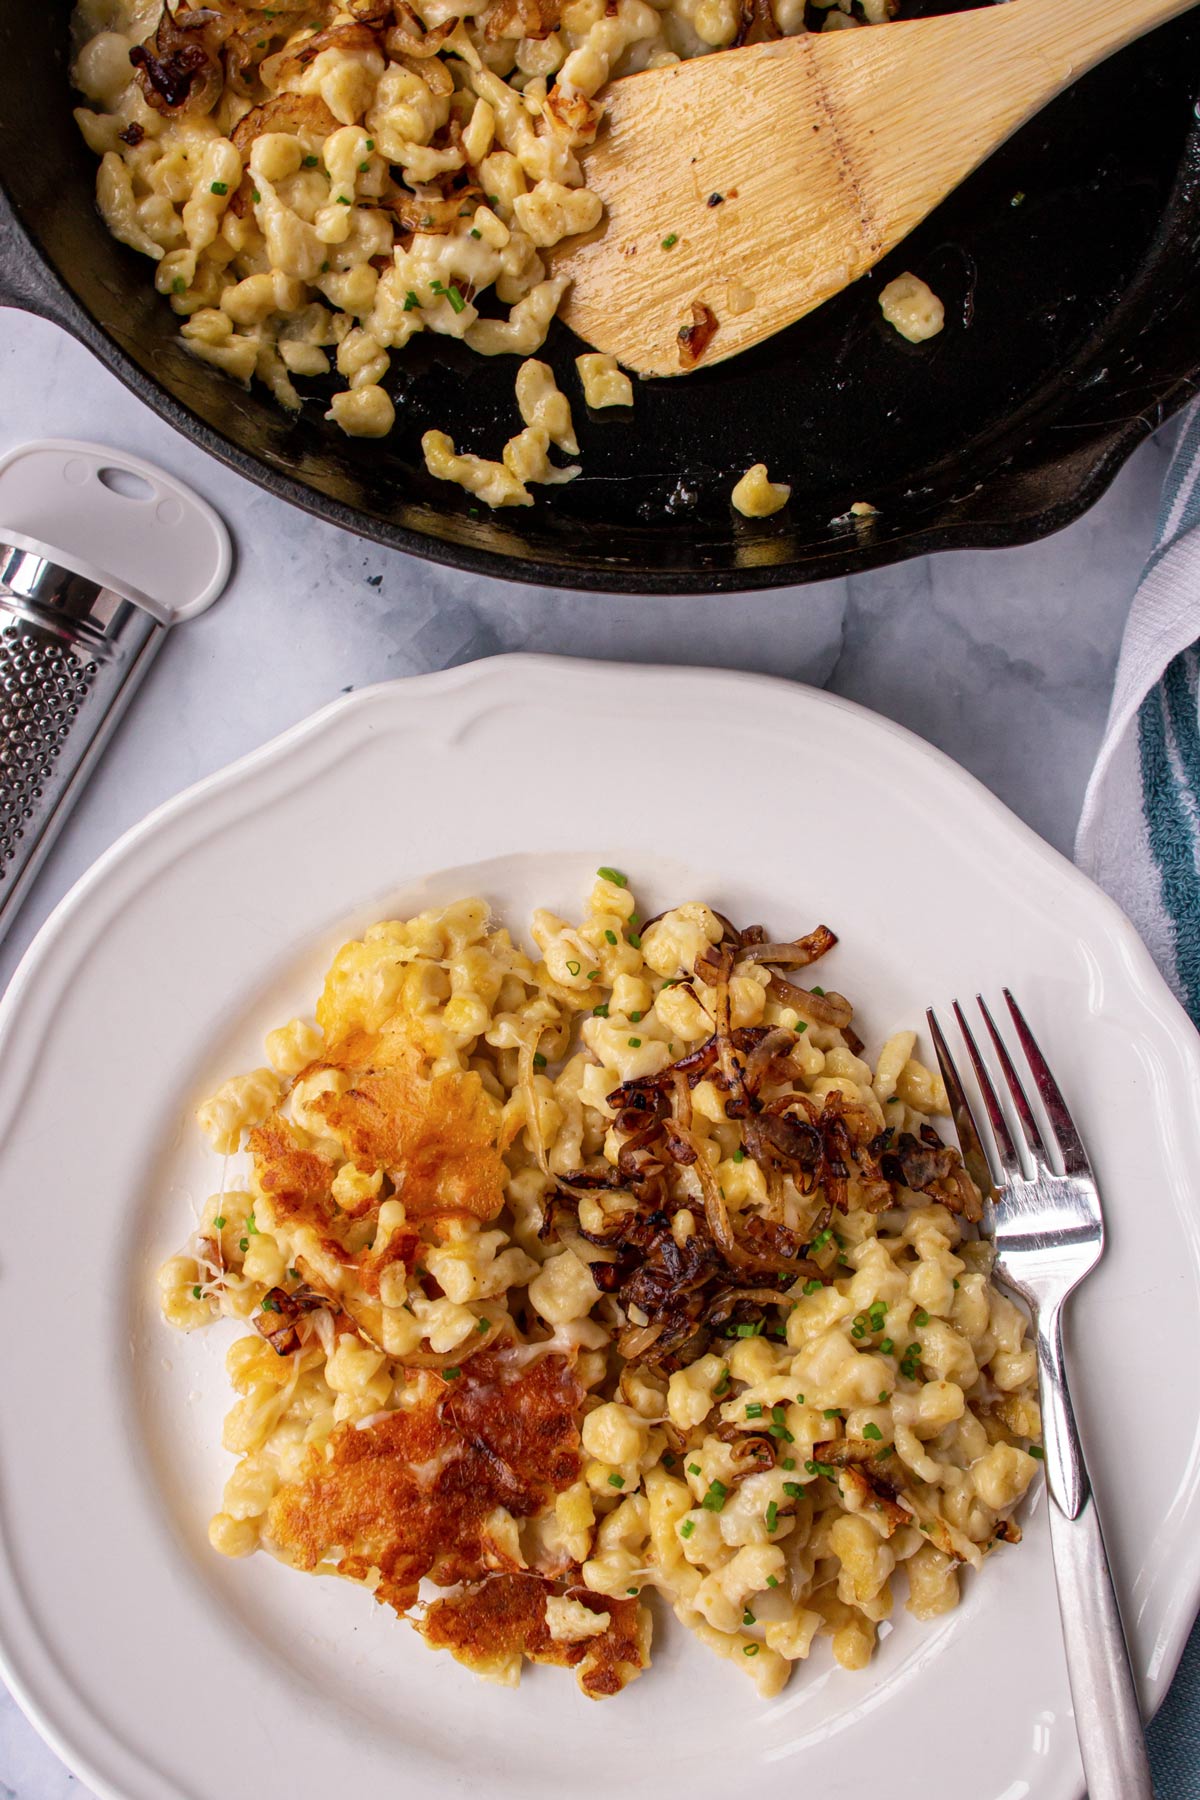 A skillet of kasnocken next to a plate of the cheesy spaetzle dumplings with a fork.